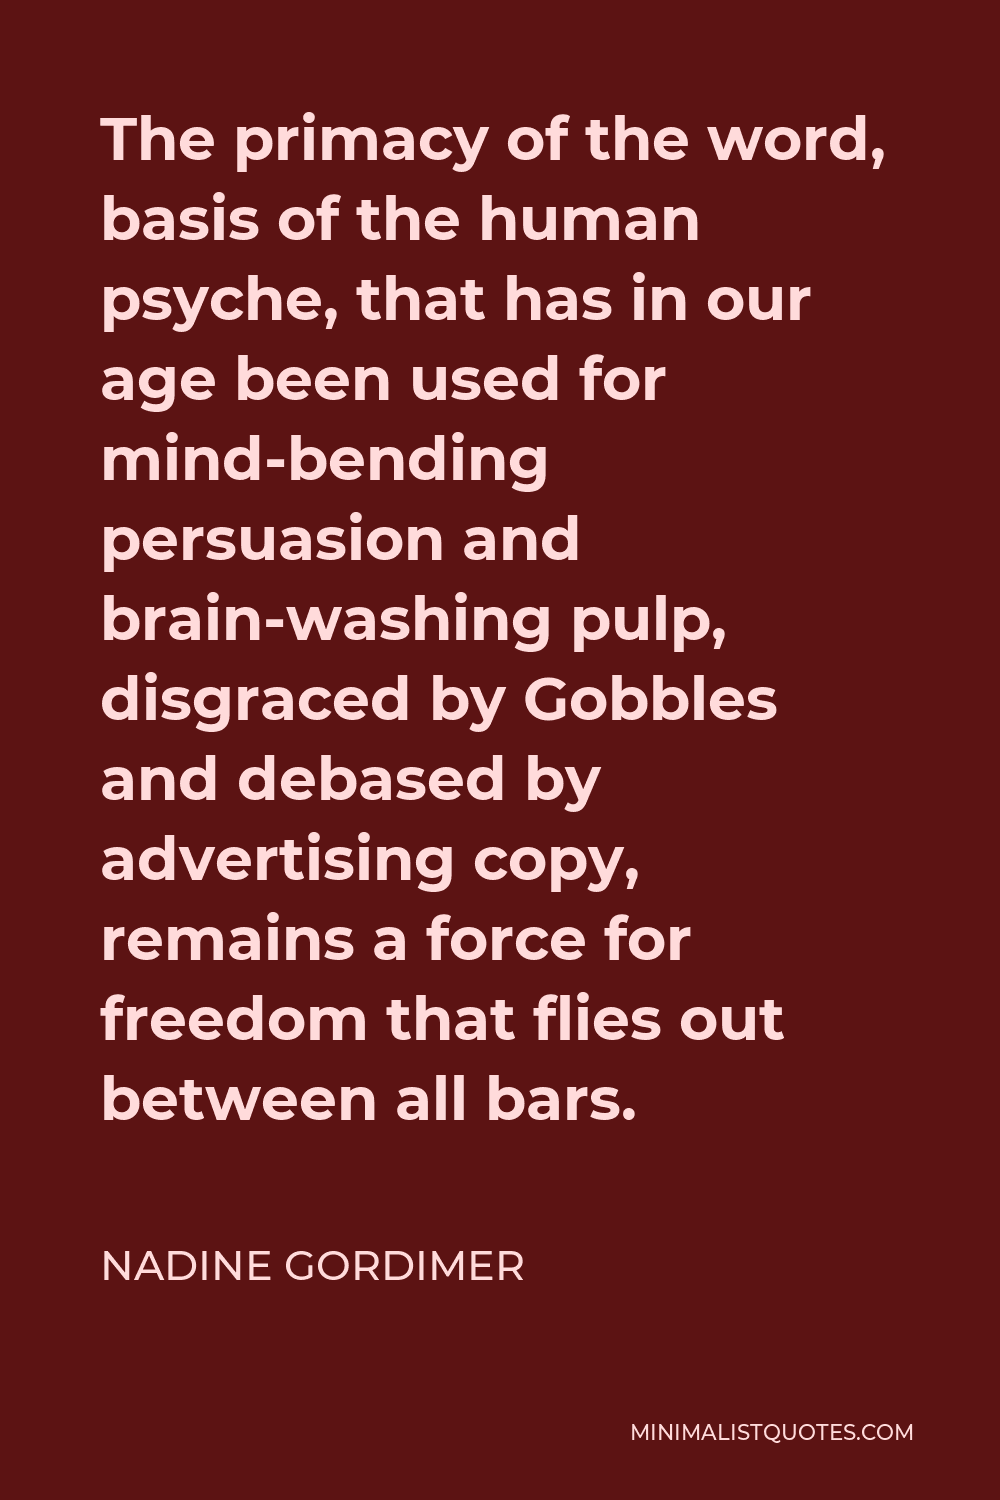 Nadine Gordimer Quote - The primacy of the word, basis of the human psyche, that has in our age been used for mind-bending persuasion and brain-washing pulp, disgraced by Gobbles and debased by advertising copy, remains a force for freedom that flies out between all bars.